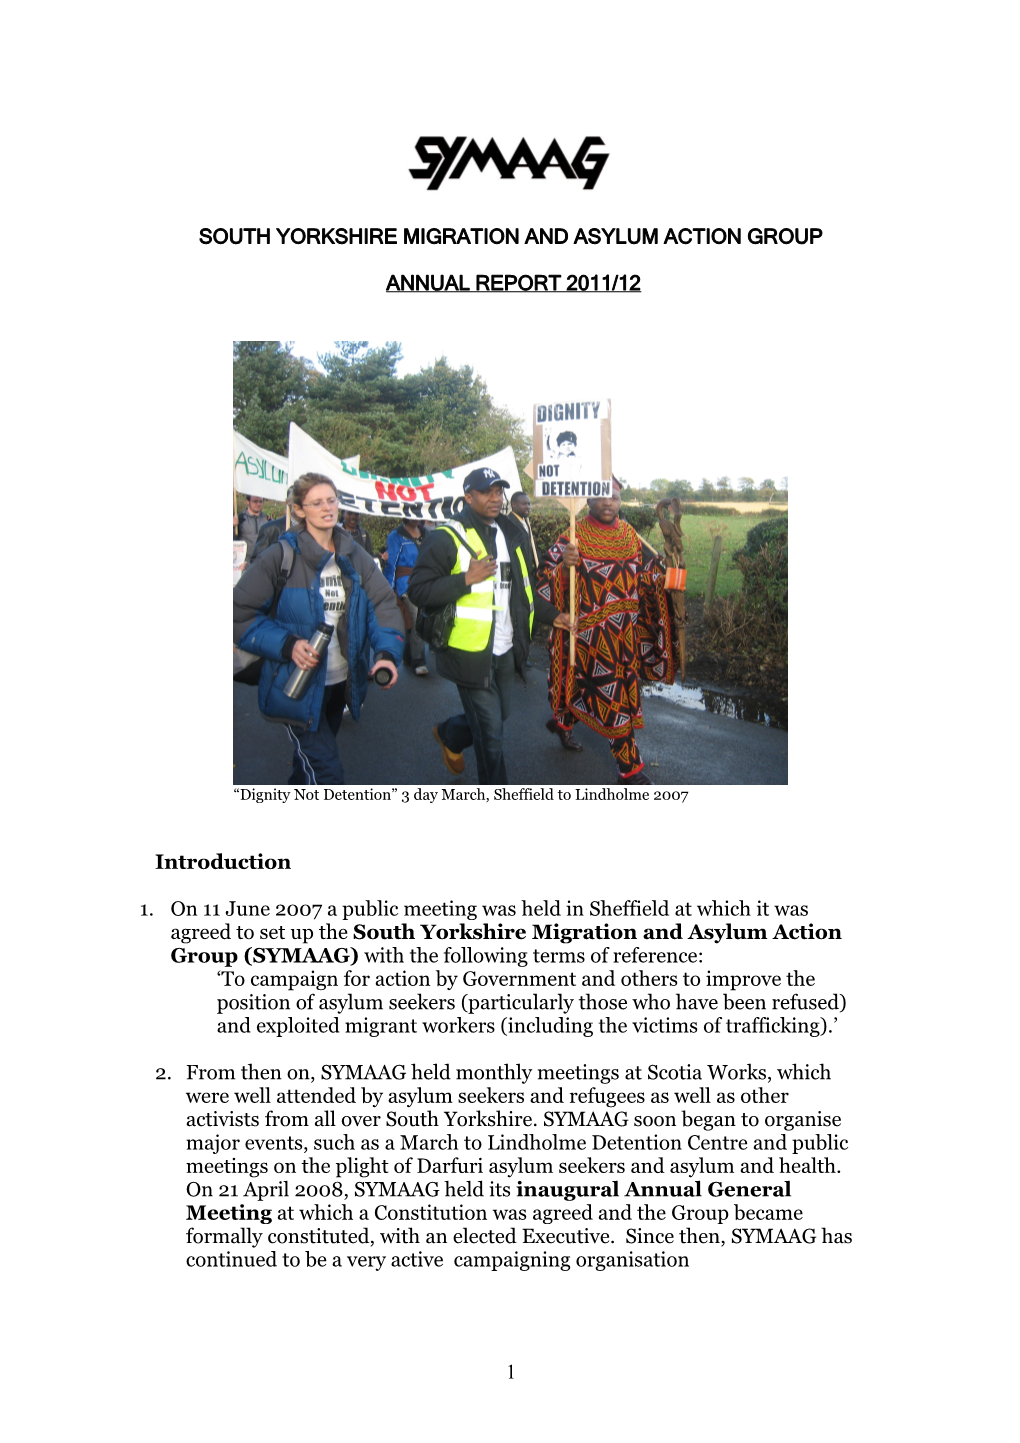 South Yorkshire Migration and Asylum Action Group